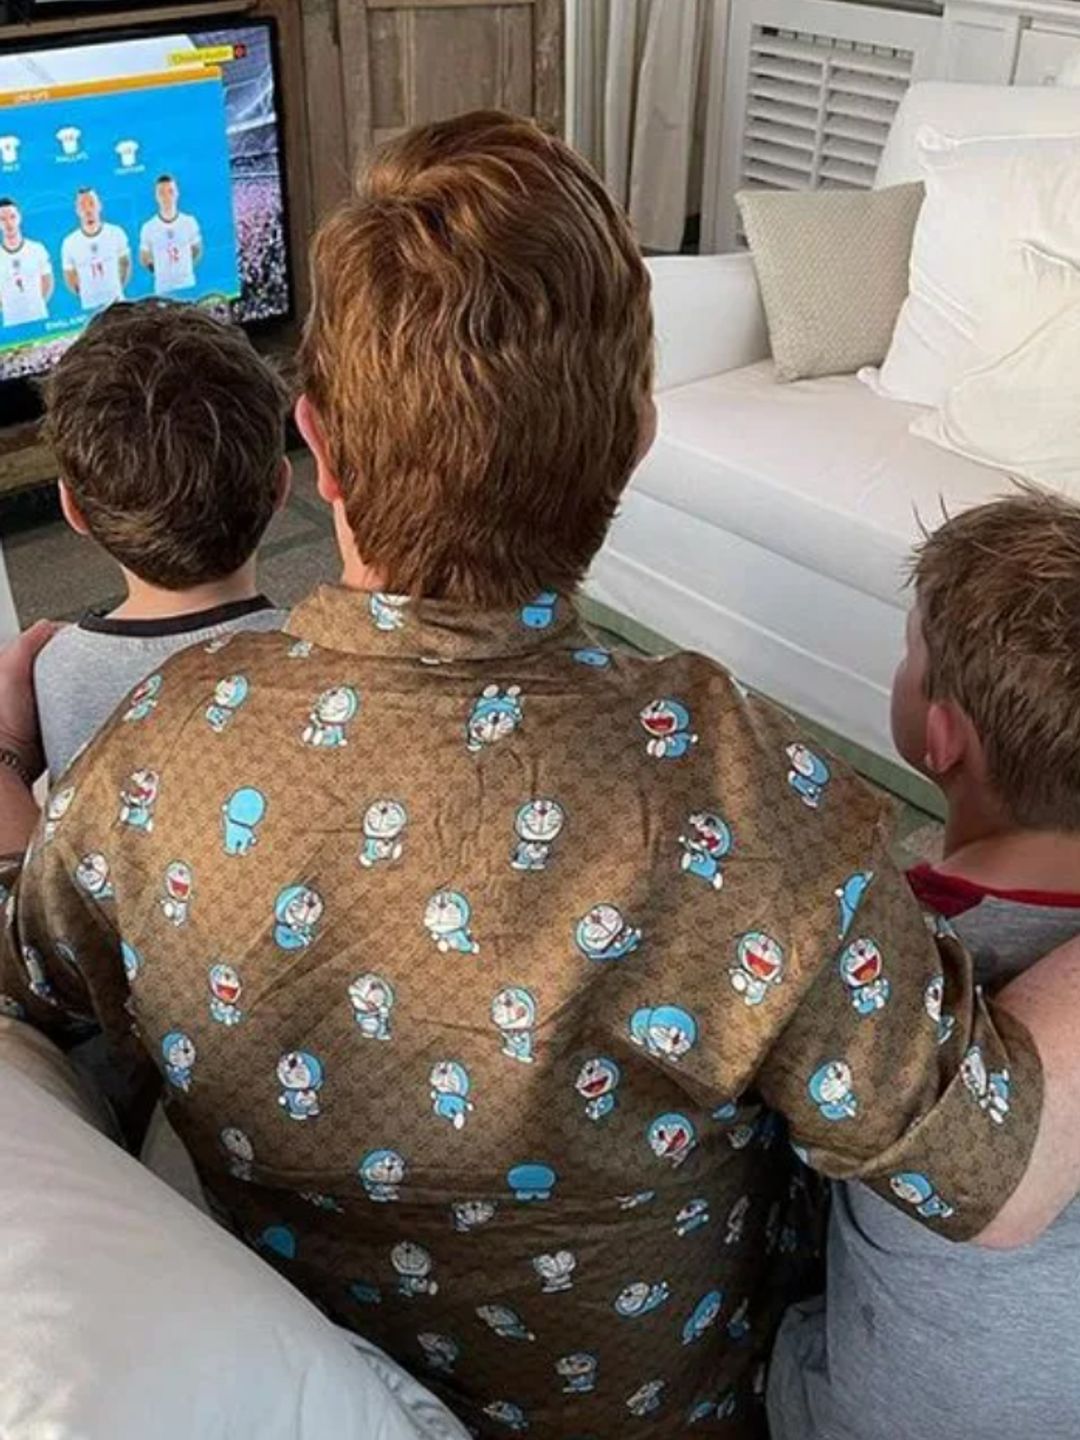 Elton John and his two sons watching football